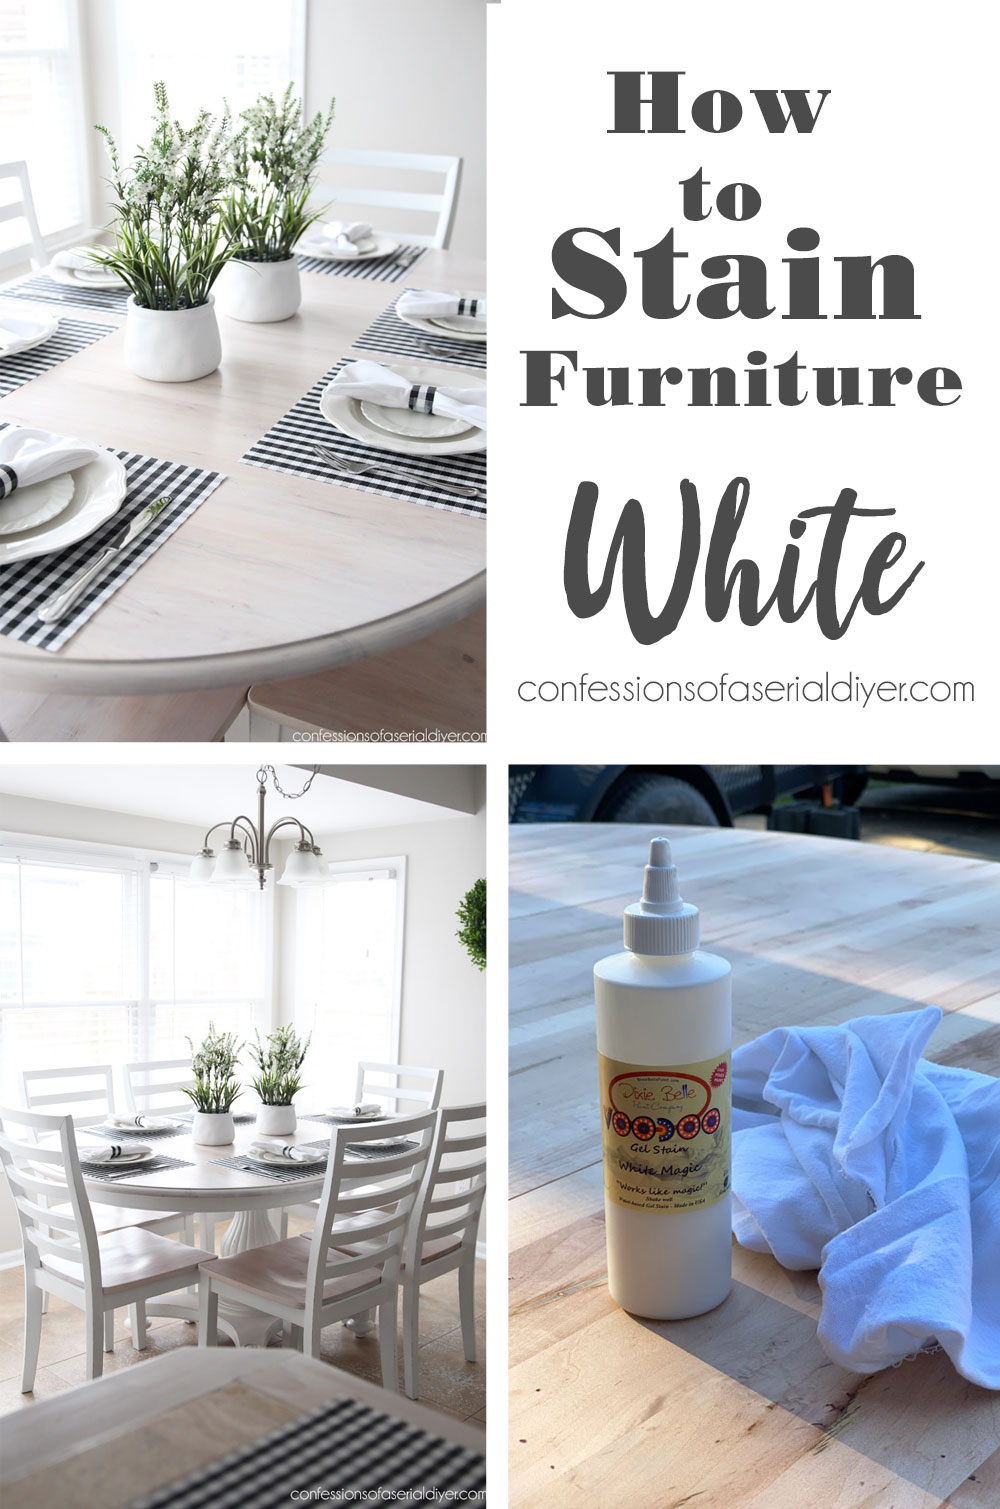 How to Stain Furniture White